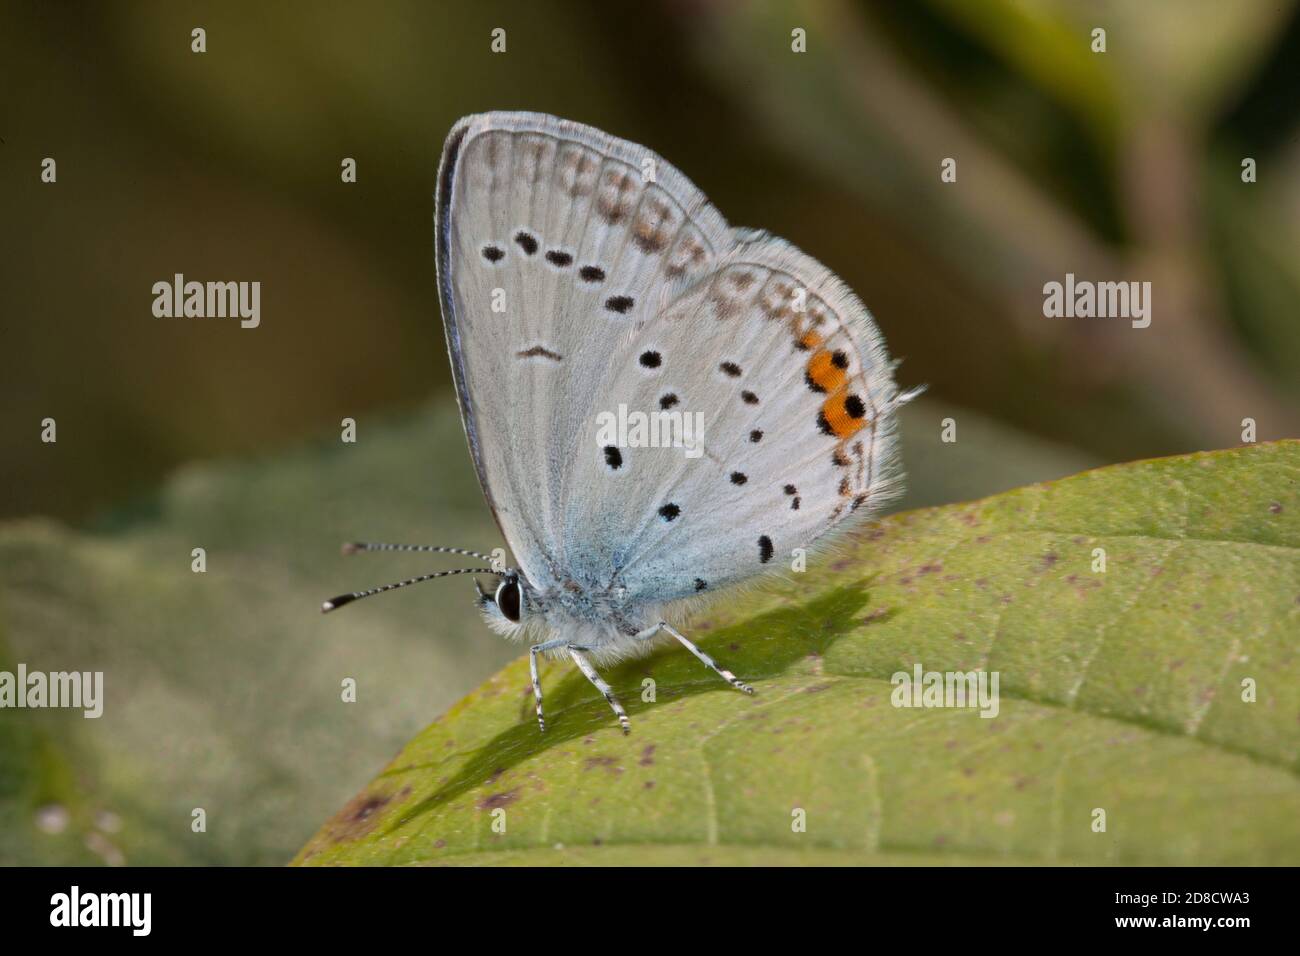 Ahort-tailed blue, Tailed Cupid (Cupido argiades), sits on a leaf, Germany Stock Photo